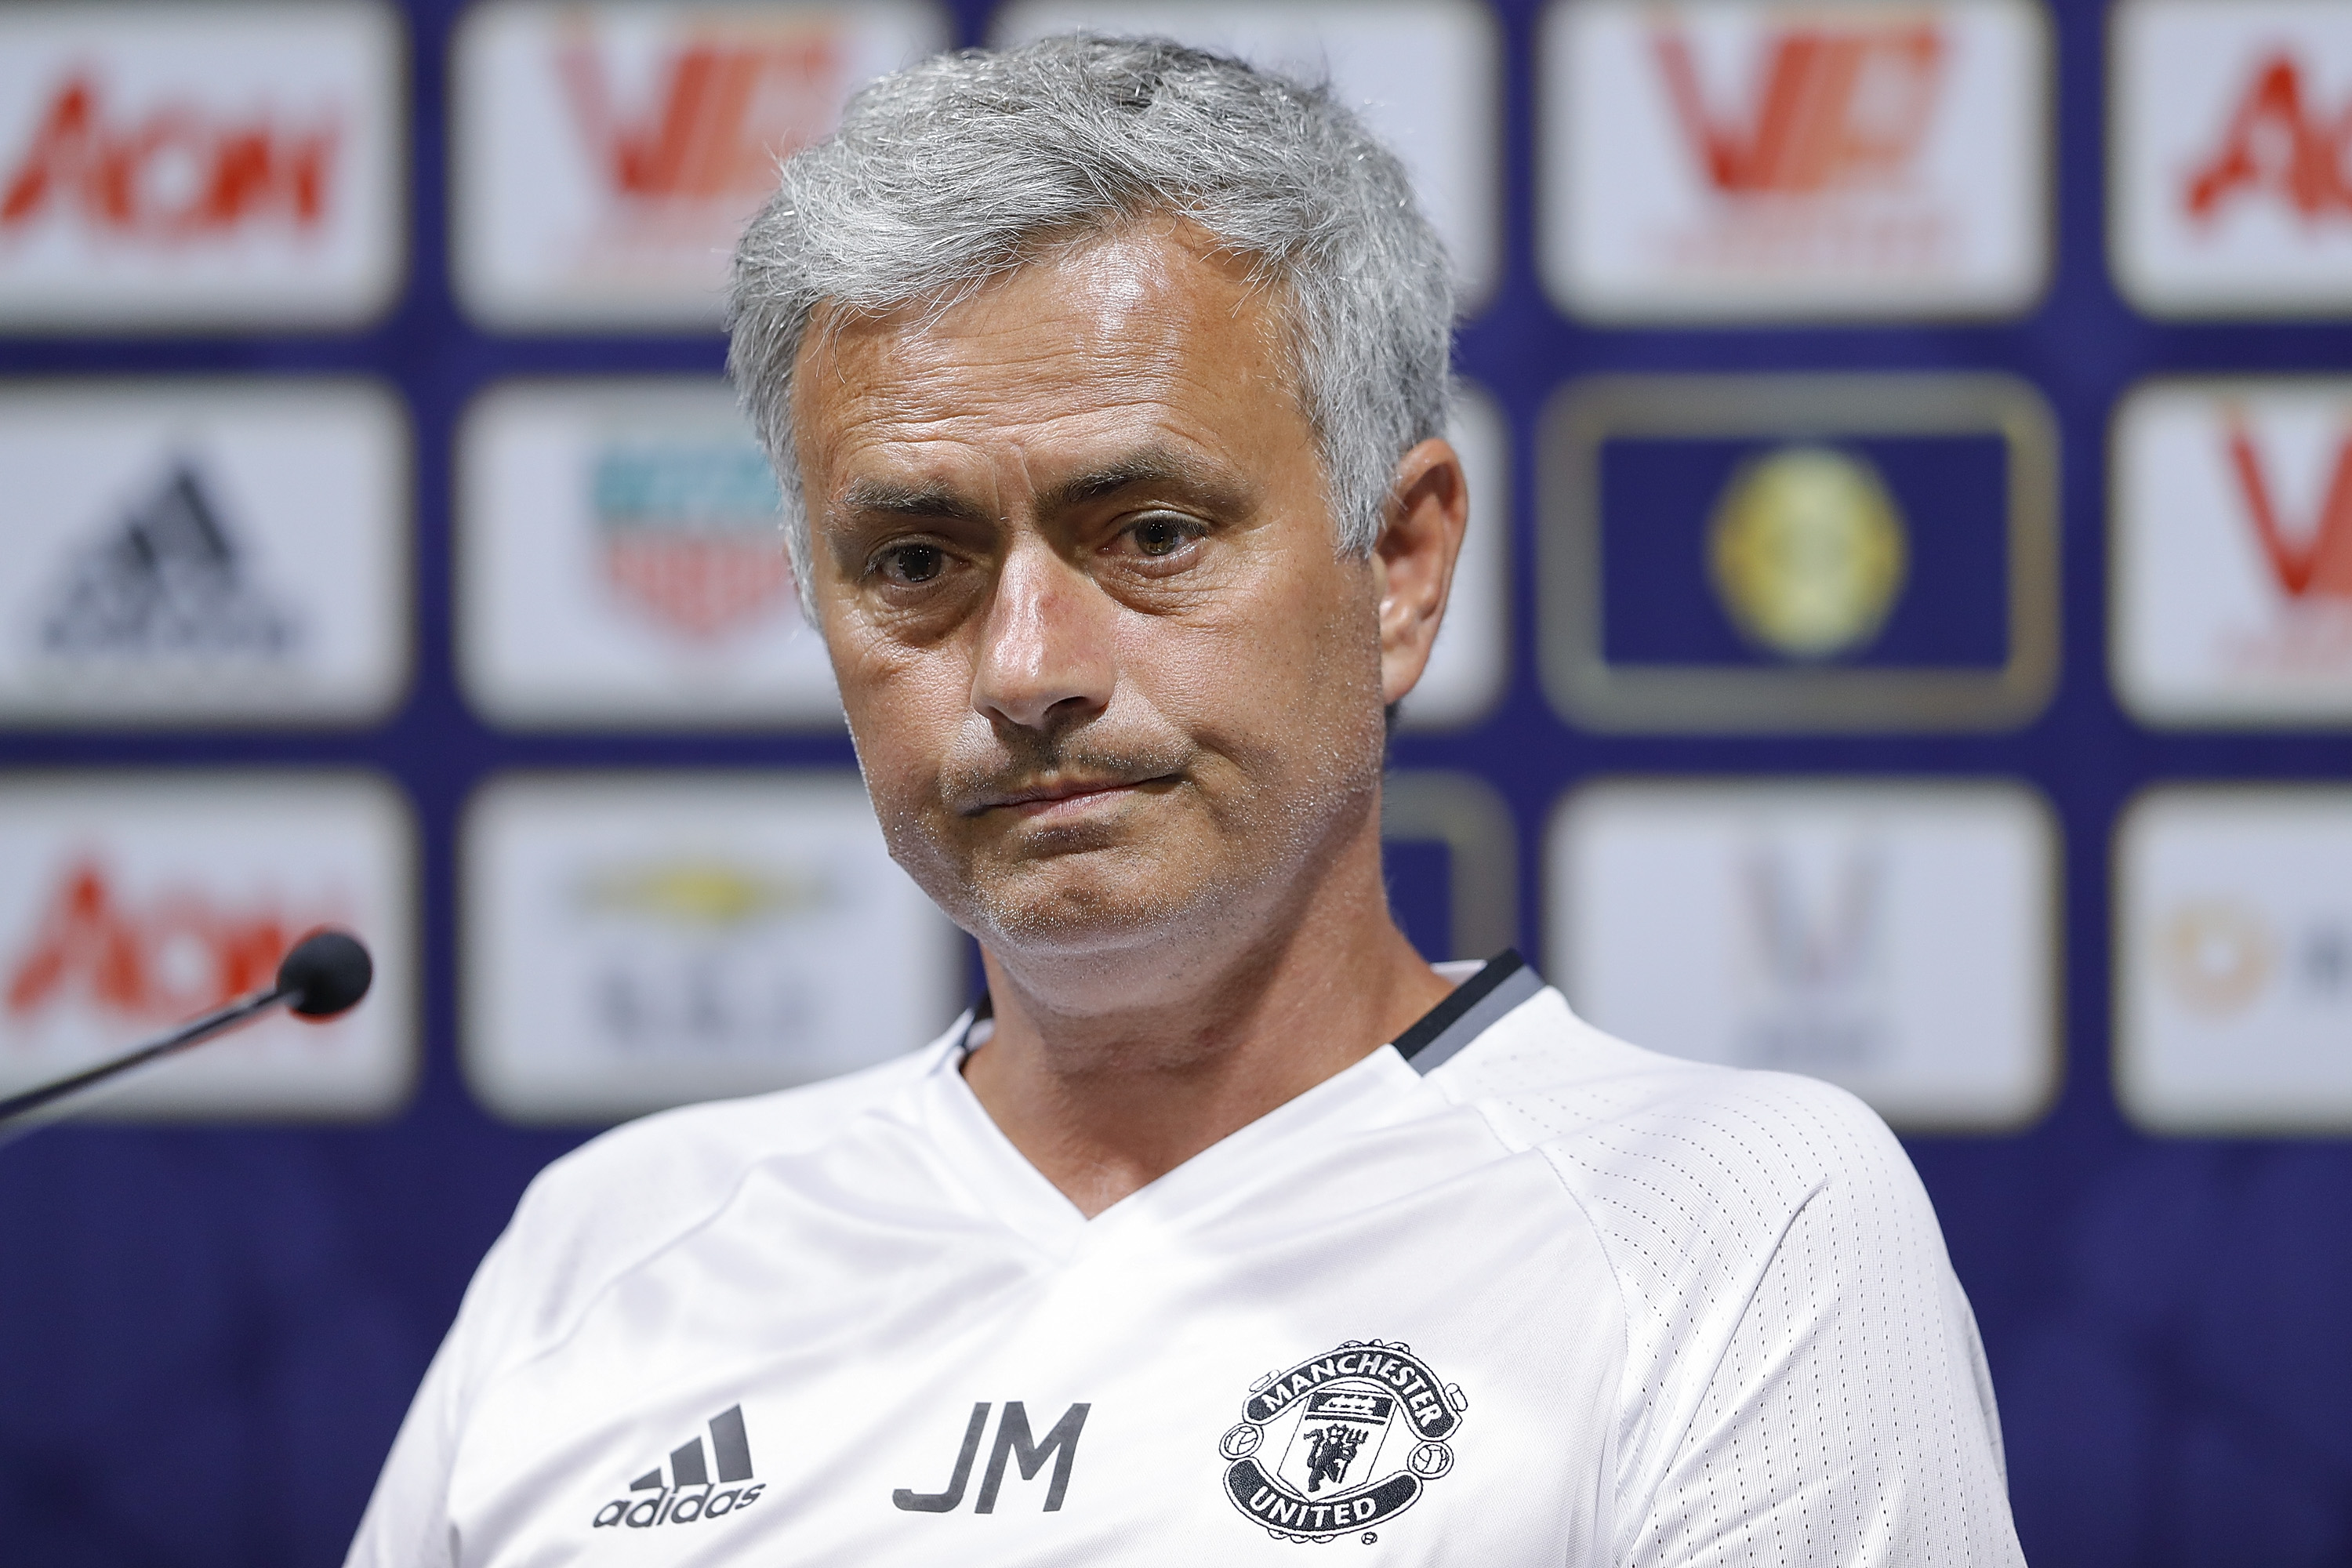 SHANGHAI, CHINA - JULY 21:  Manager Jose Mourinho of Manchester United looks on during a press conference as part of their pre-season tour of China at Shanghai Stadium on July 21, 2016 in Shanghai, China.  (Photo by Lintao Zhang/Getty Images)